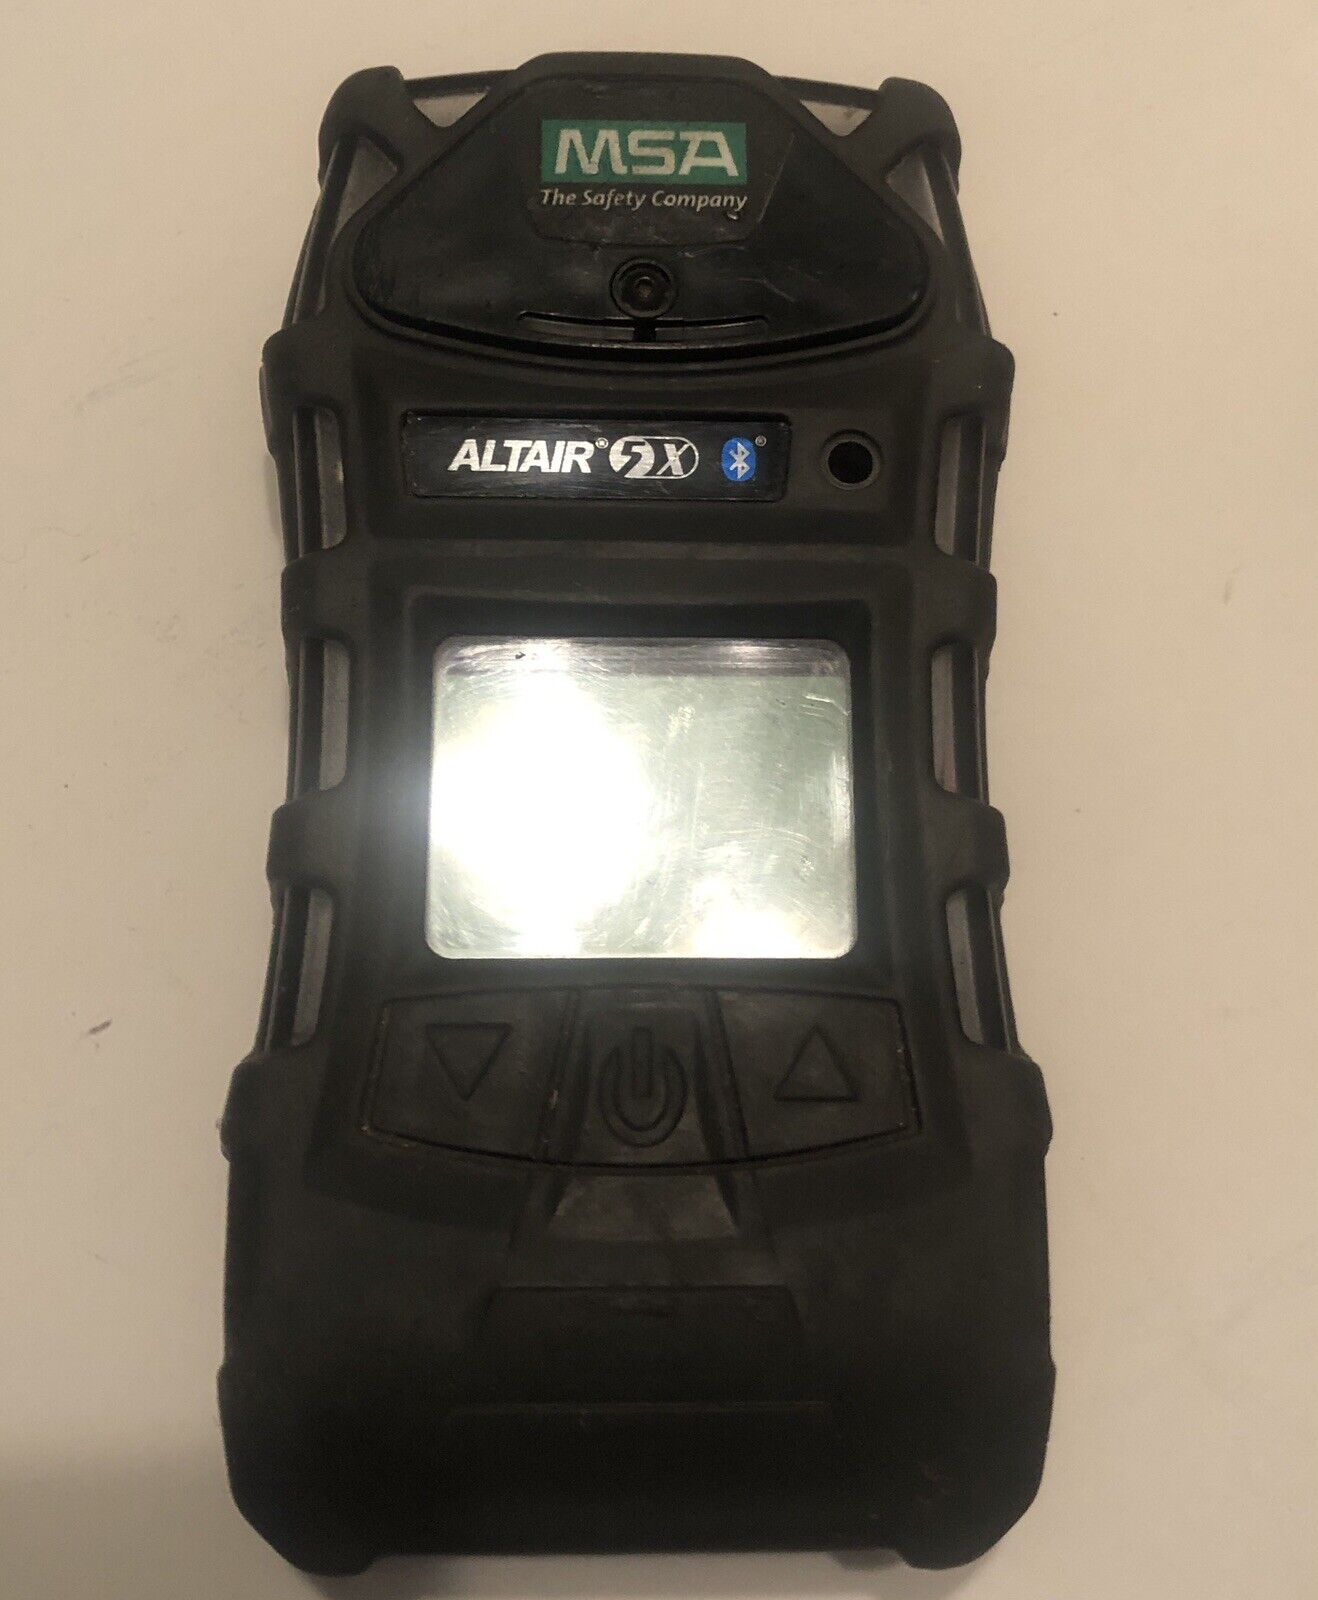 MSA Altair 5x  Bluetooth Gas Detector Meter - Used In Good Condition